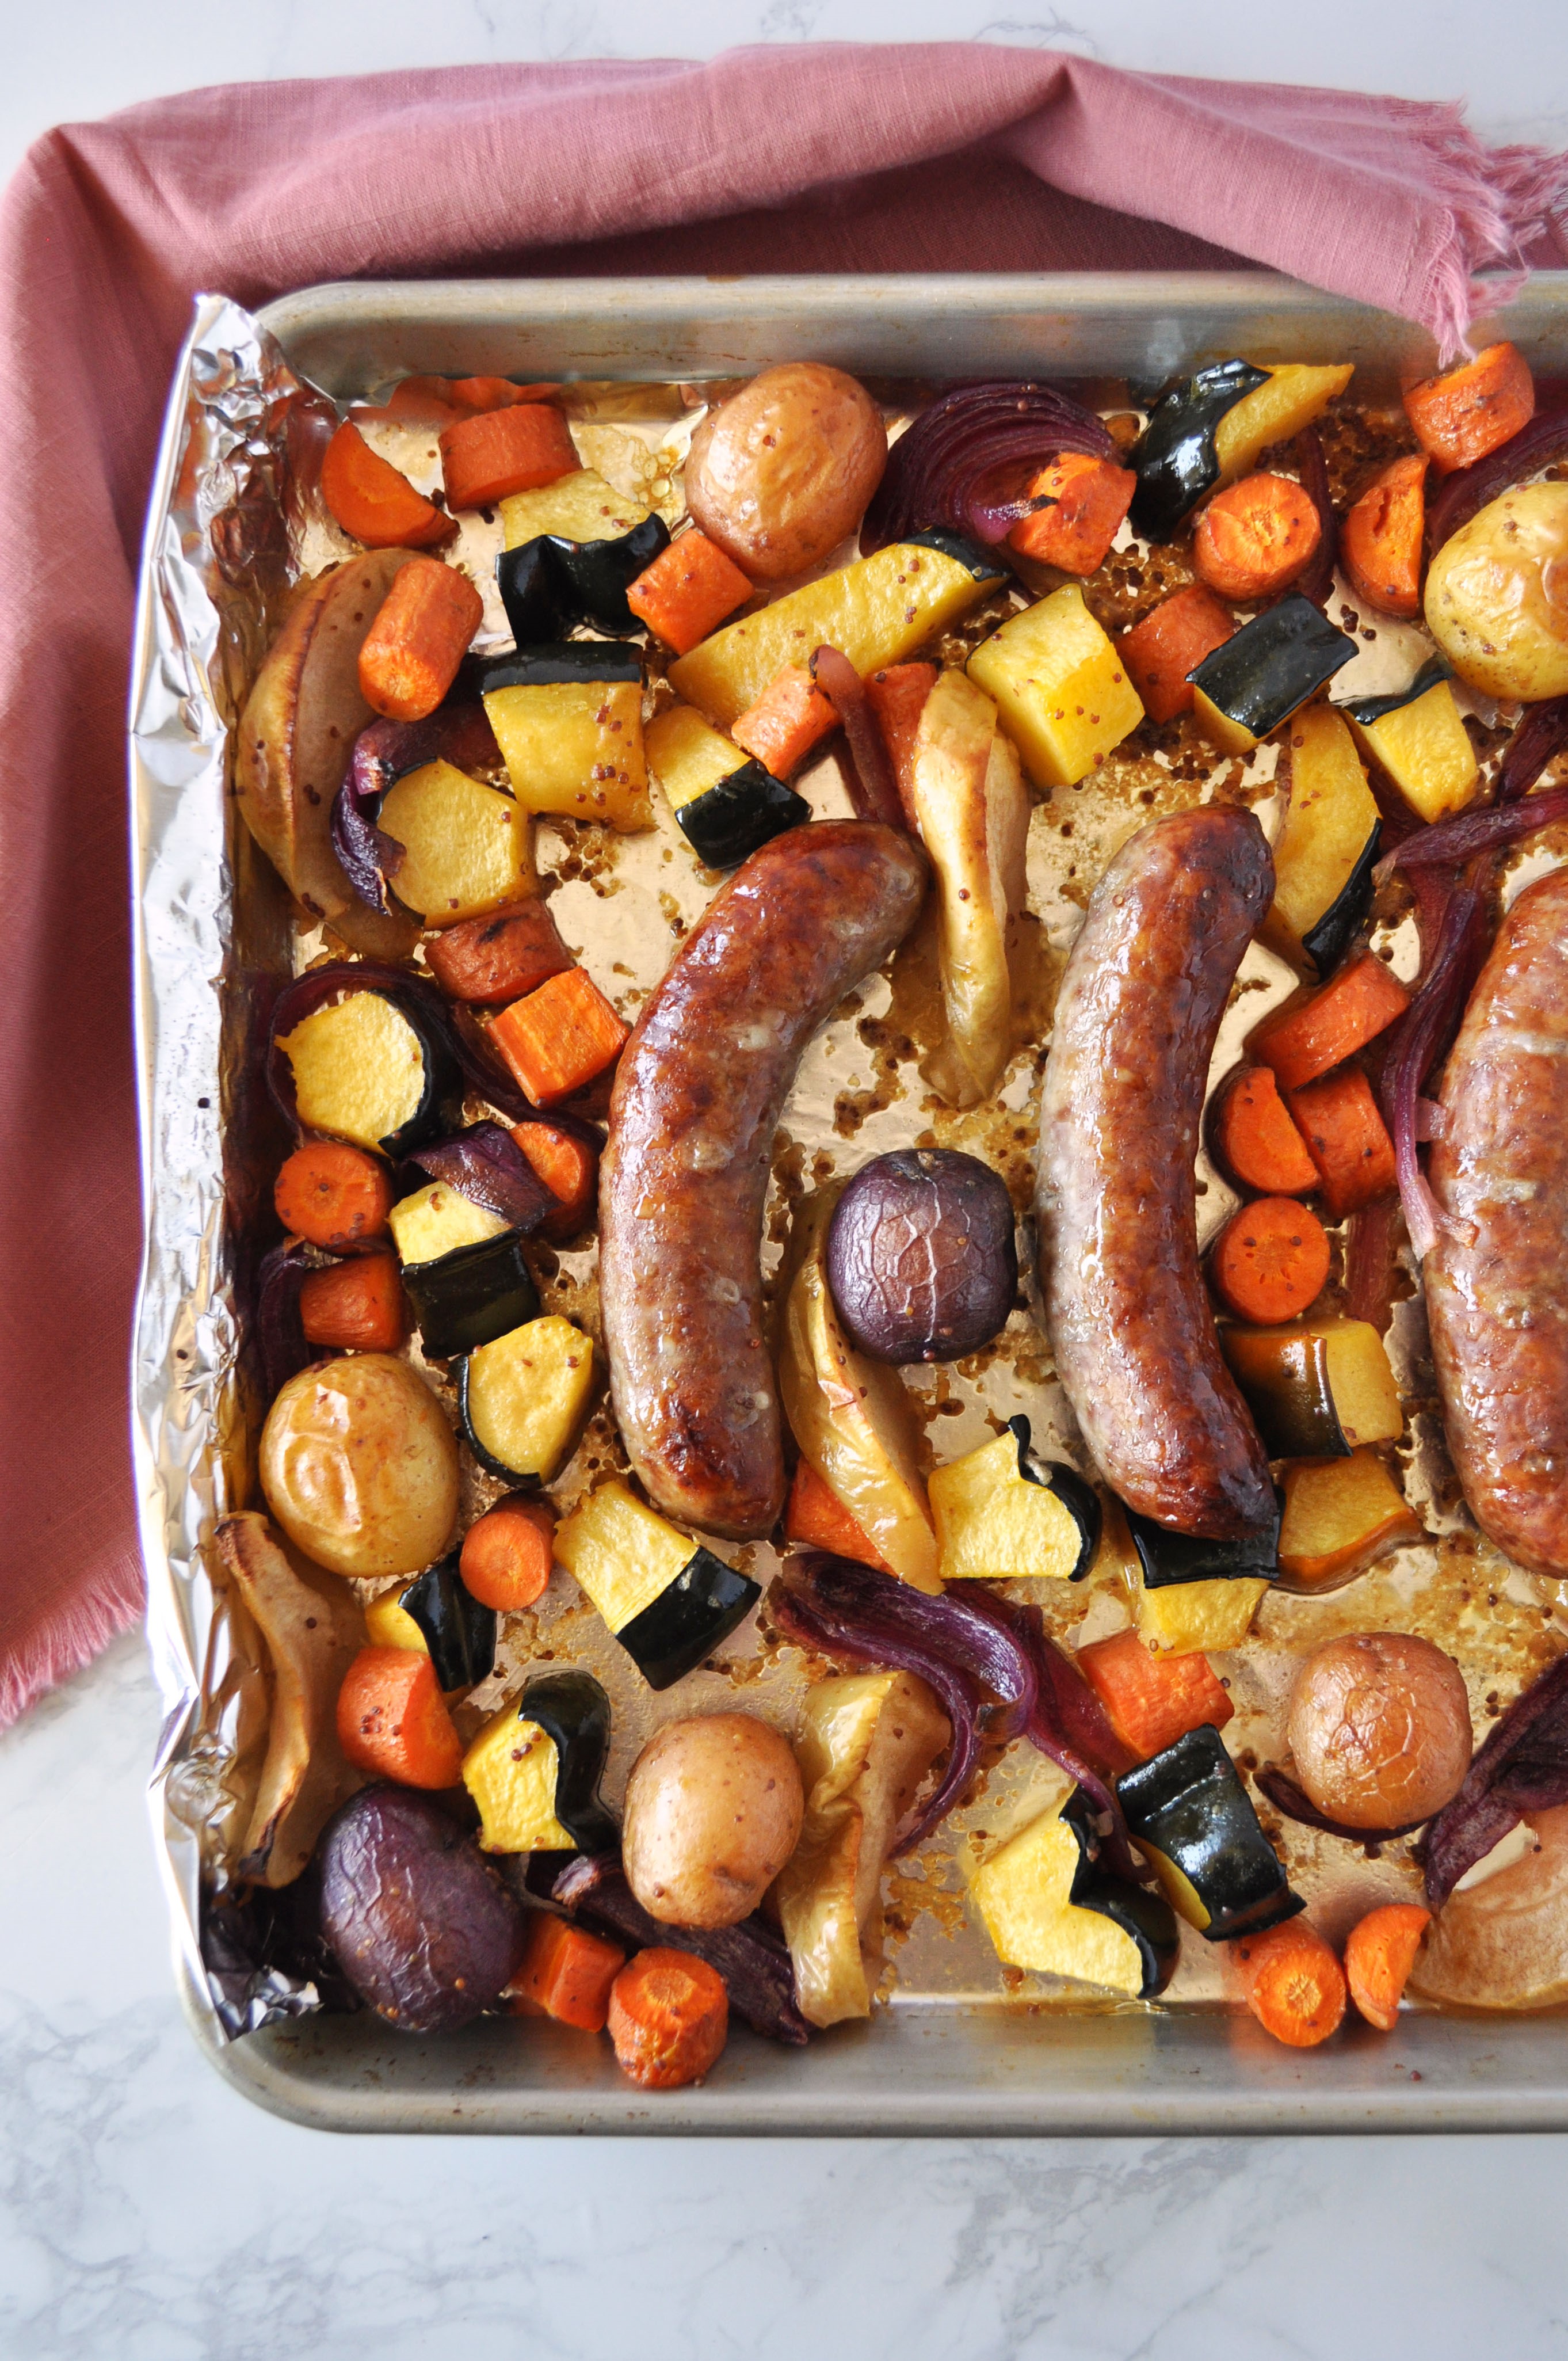 6 Sheetpan Brats and Roasted Vegetables